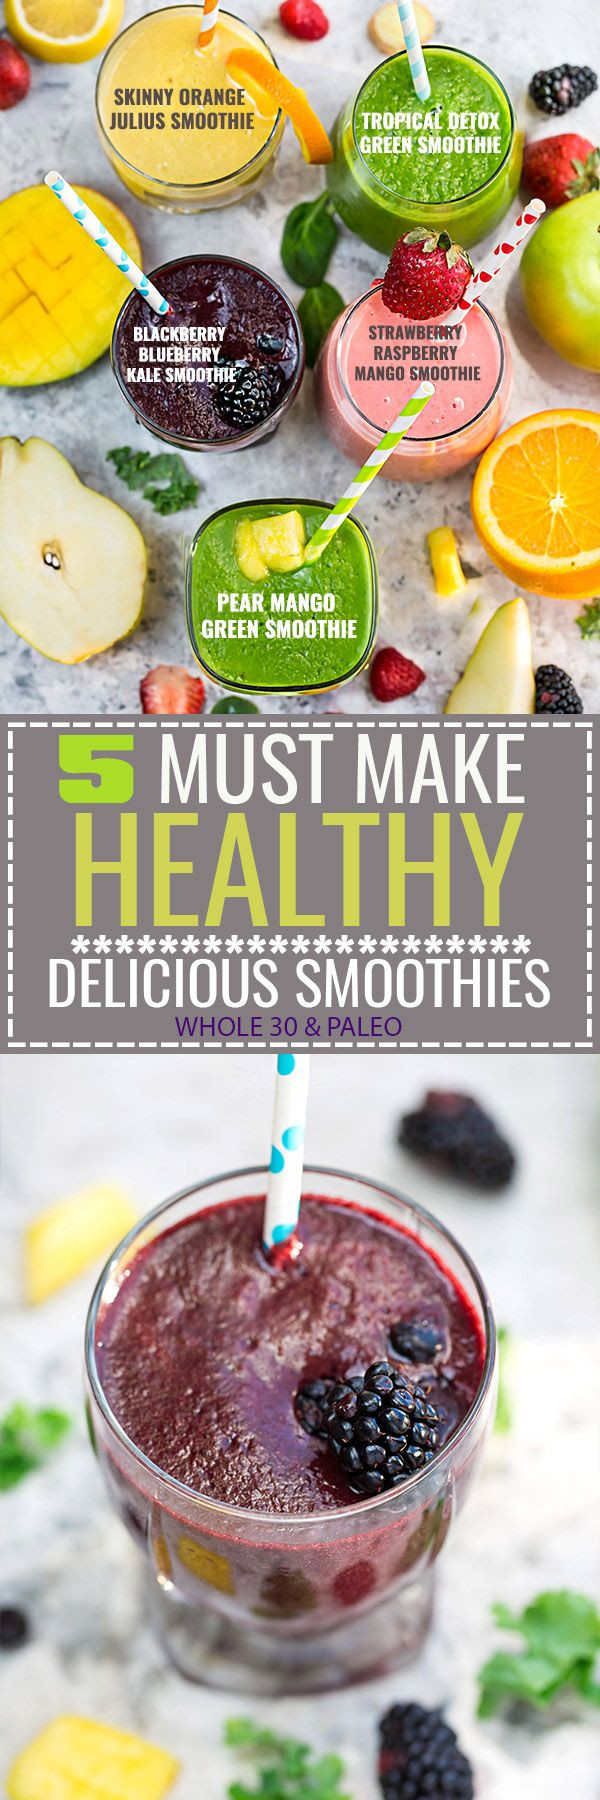 Best Tasting Healthy Smoothies
 5 of the BEST tasting and Easy to make Healthy Detox